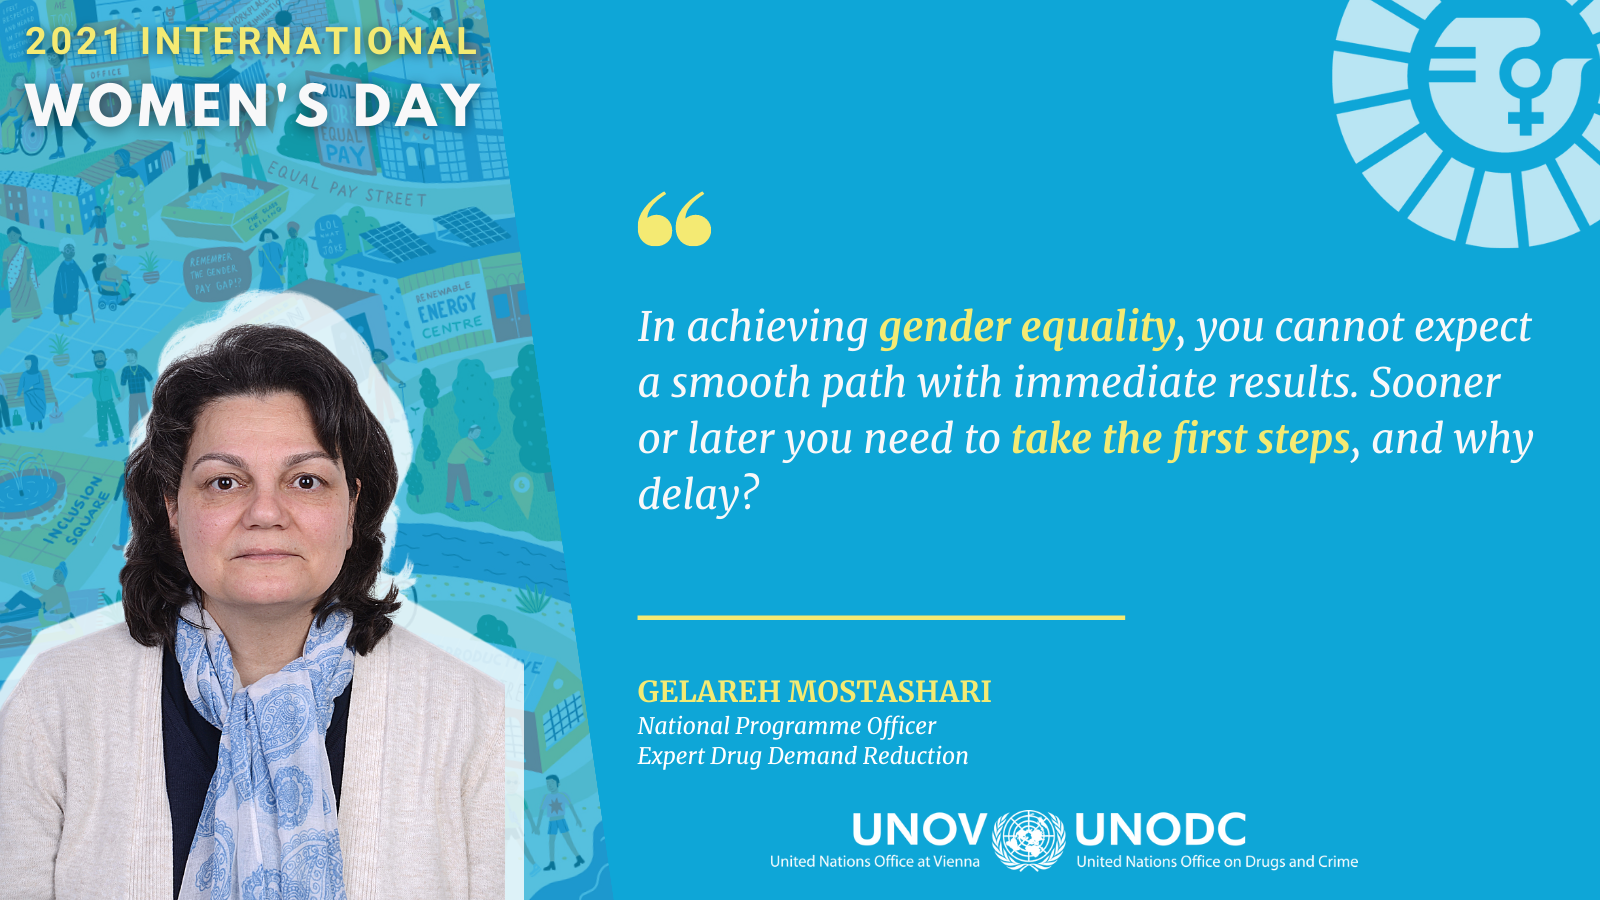 Quote of Gelareh Mostashari "In achieving gender equality, you cannot expect a smooth path with immediate desirable results, you need to make the first steps should you want to get to your objective sooner or later.  And why delay the first steps longer? "